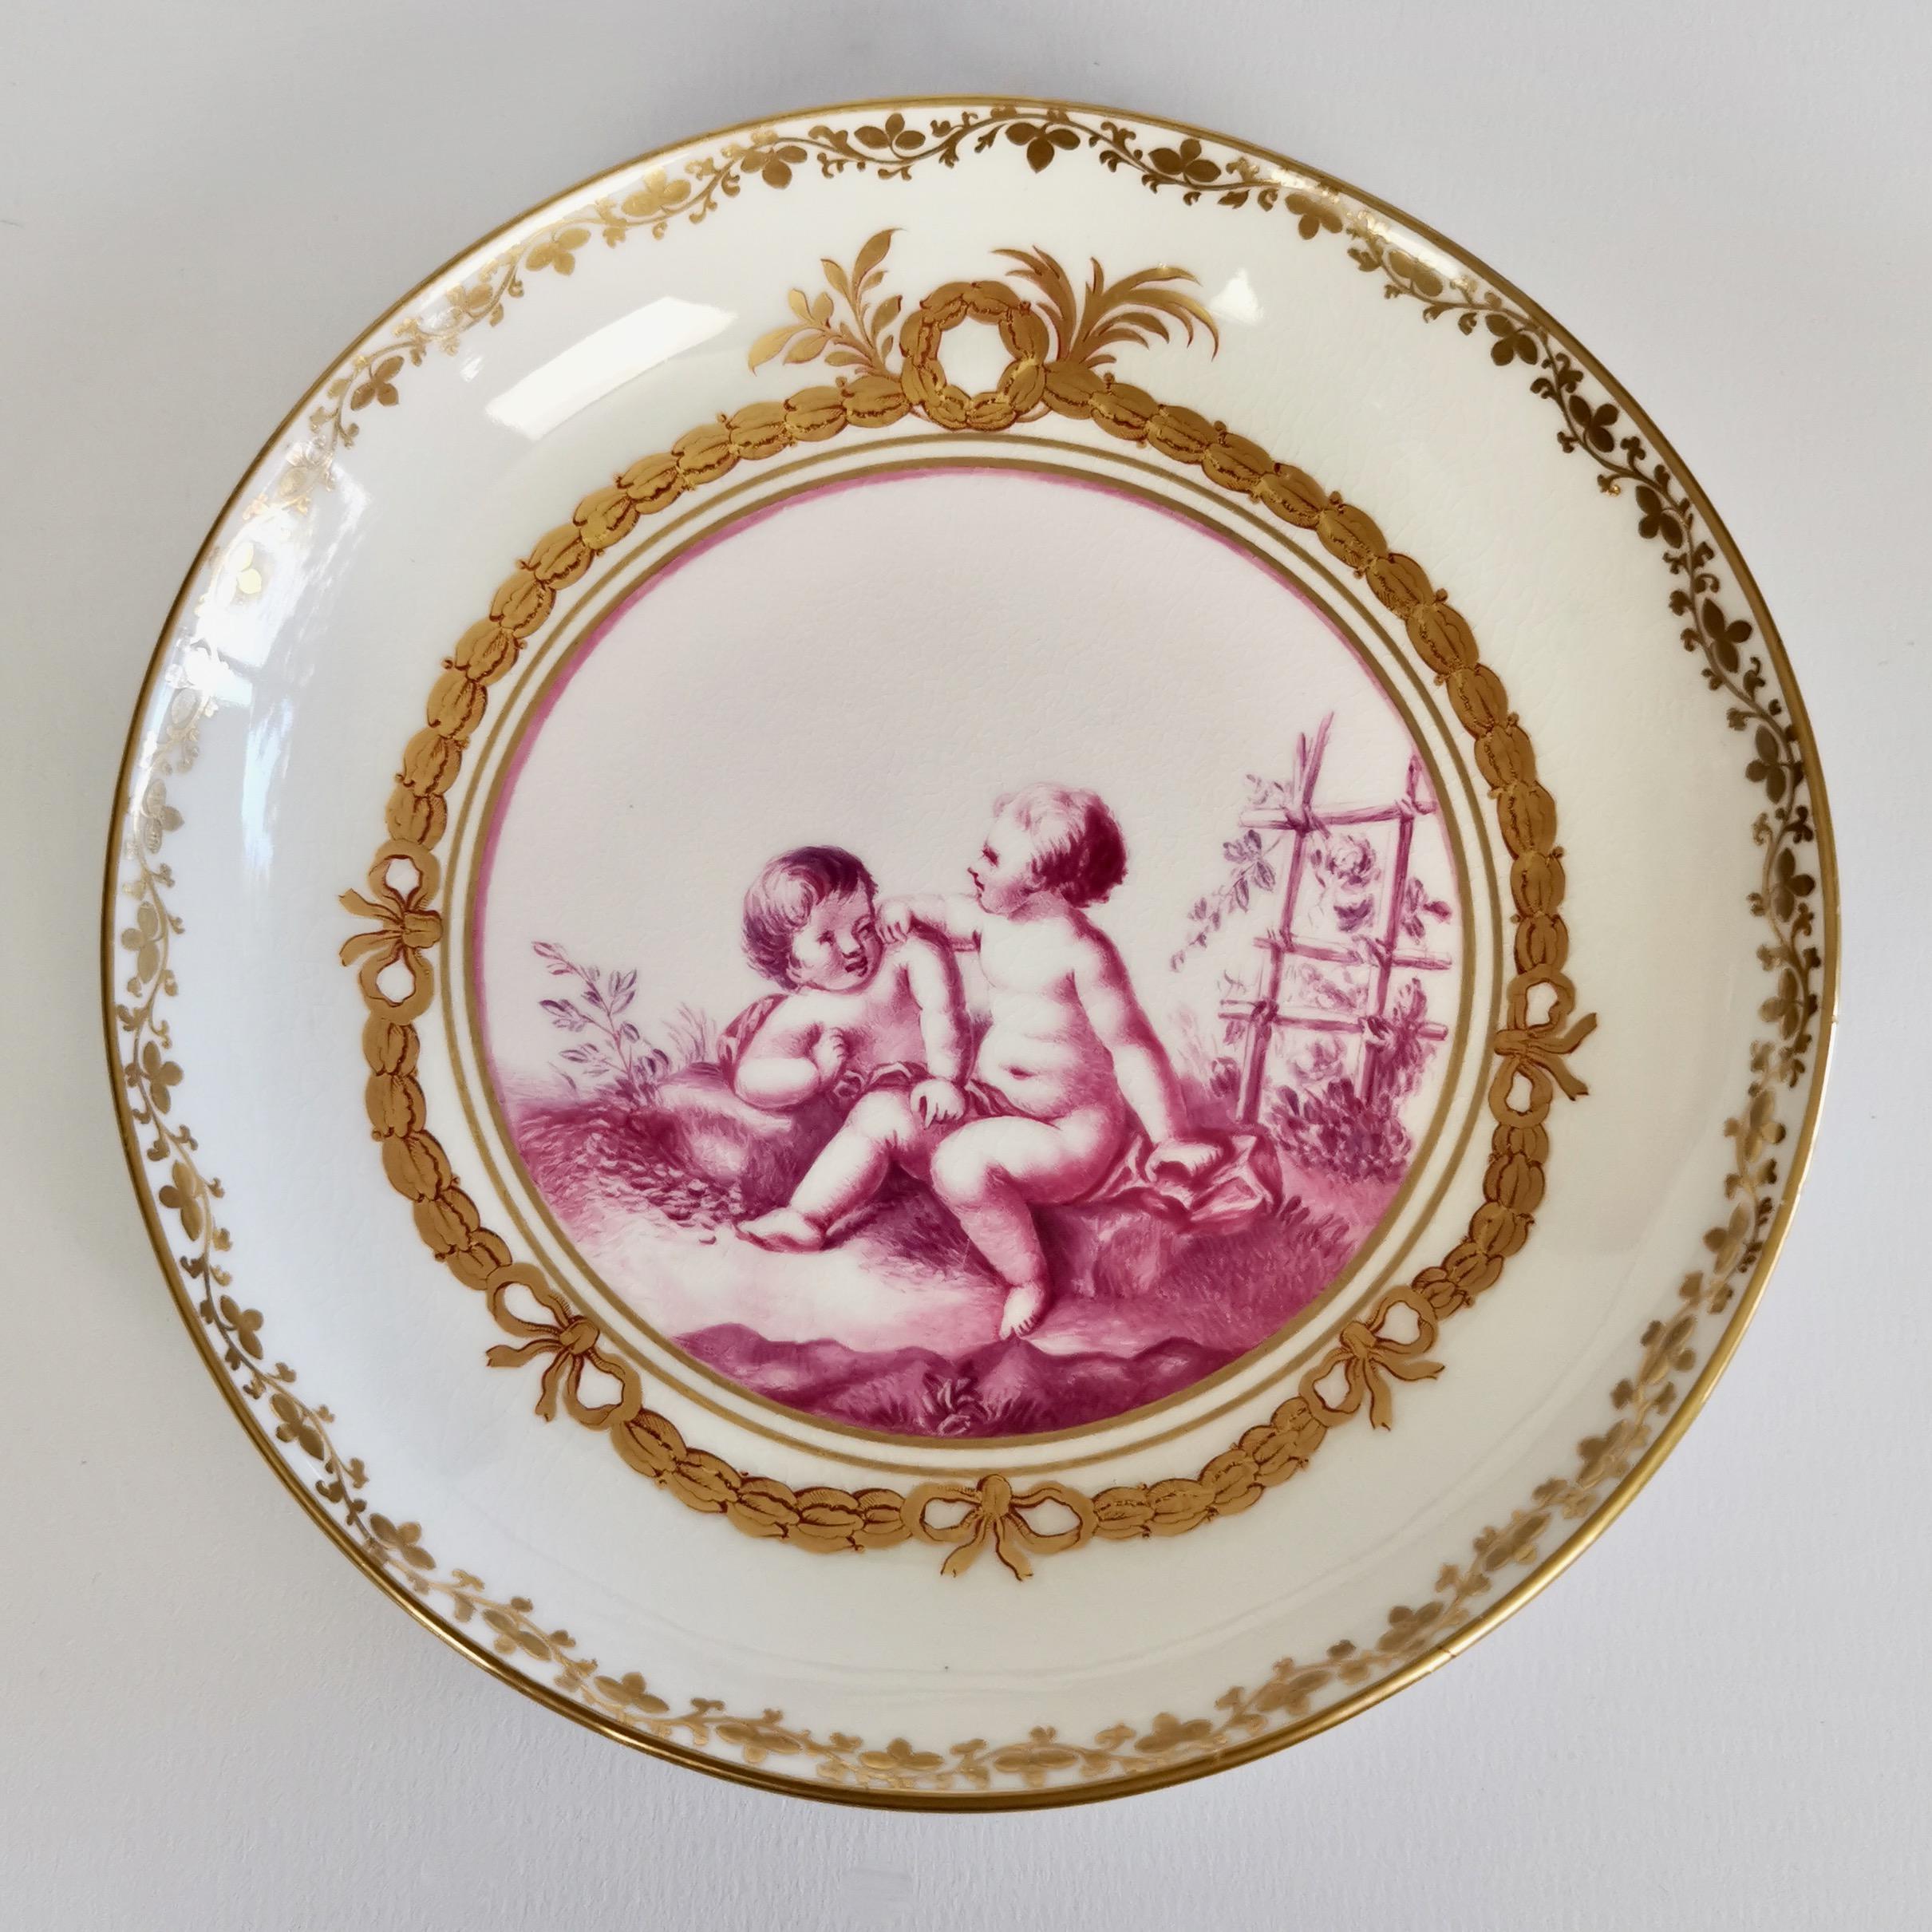 Hand-Painted Kerr & Binns Worcester Porcelain Cup and Saucer, Puce Putti Playing, circa 1855